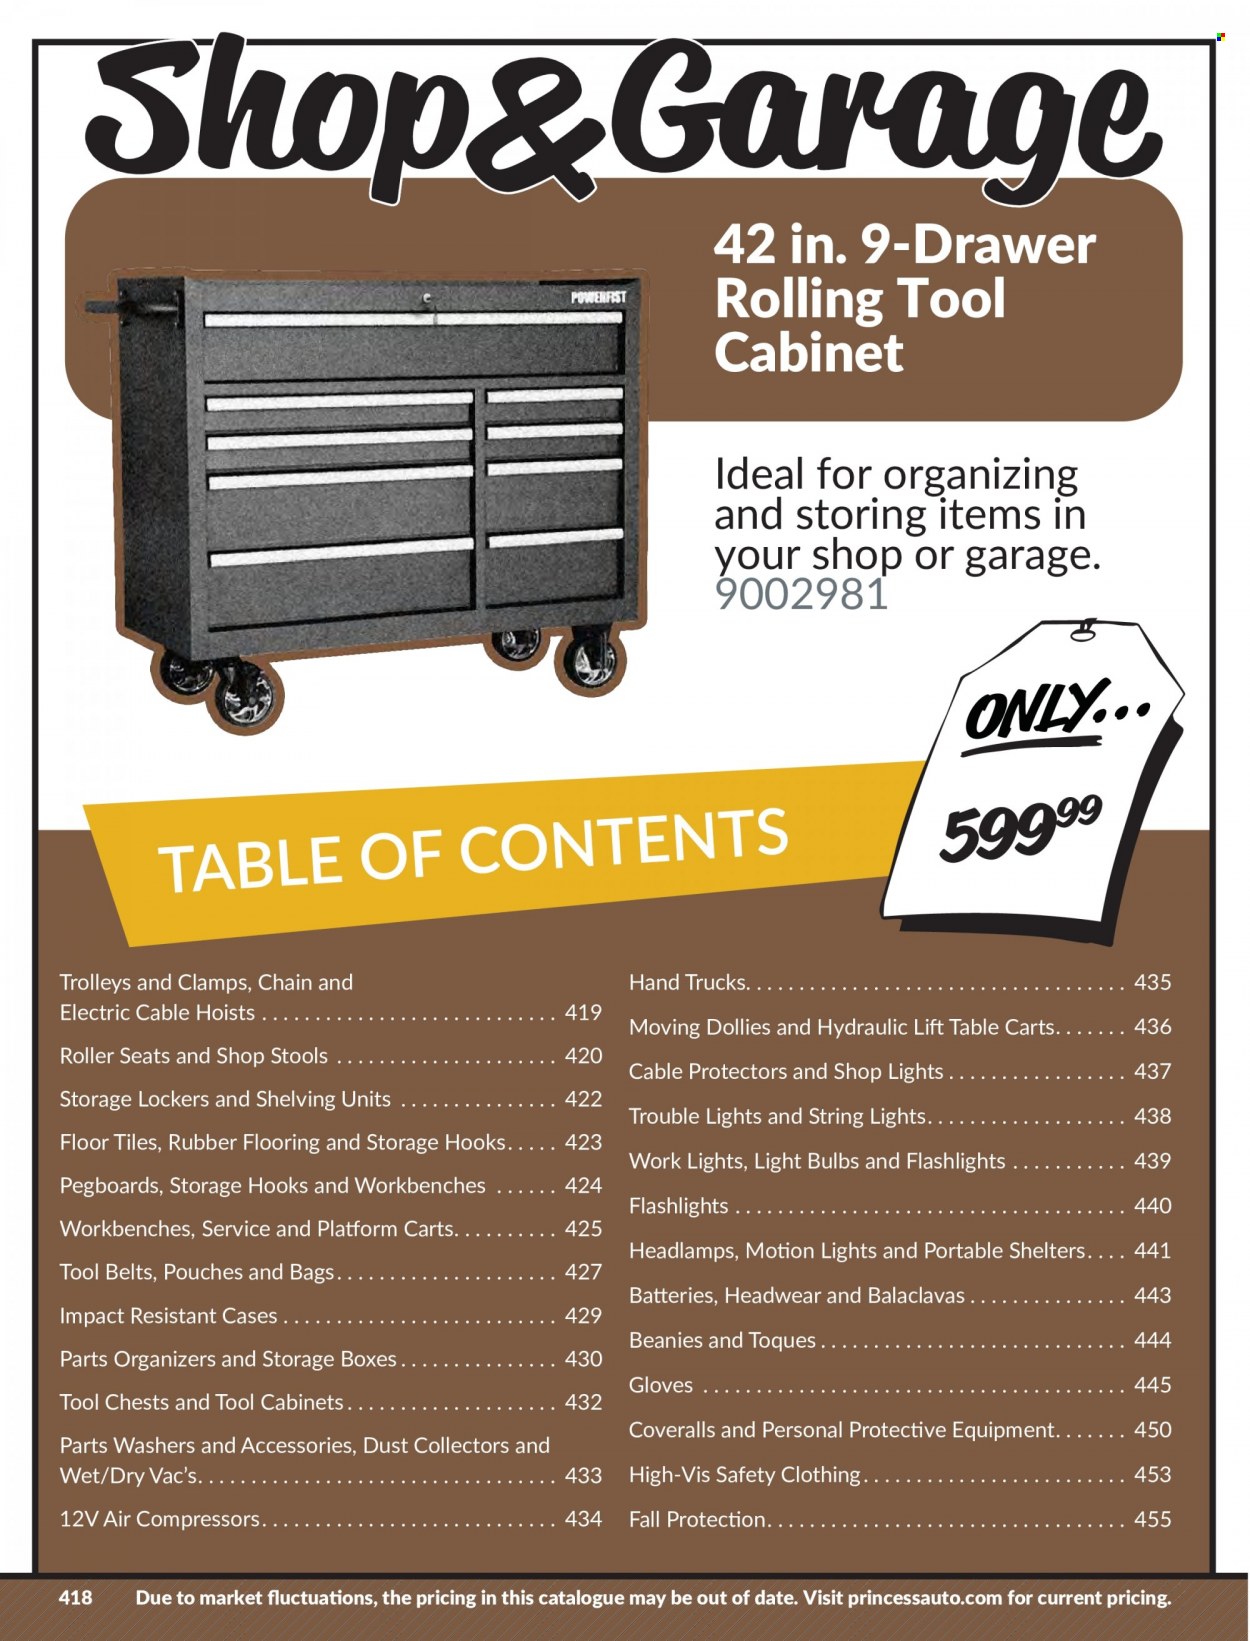 Princess Auto Flyer - Sales products - roller, string lights, flooring, floor tile, tool chest, air compressor, gloves, cabinet, table, headlamp, storage box, washers, tool cabinets, tool belt, battery. Page 426.